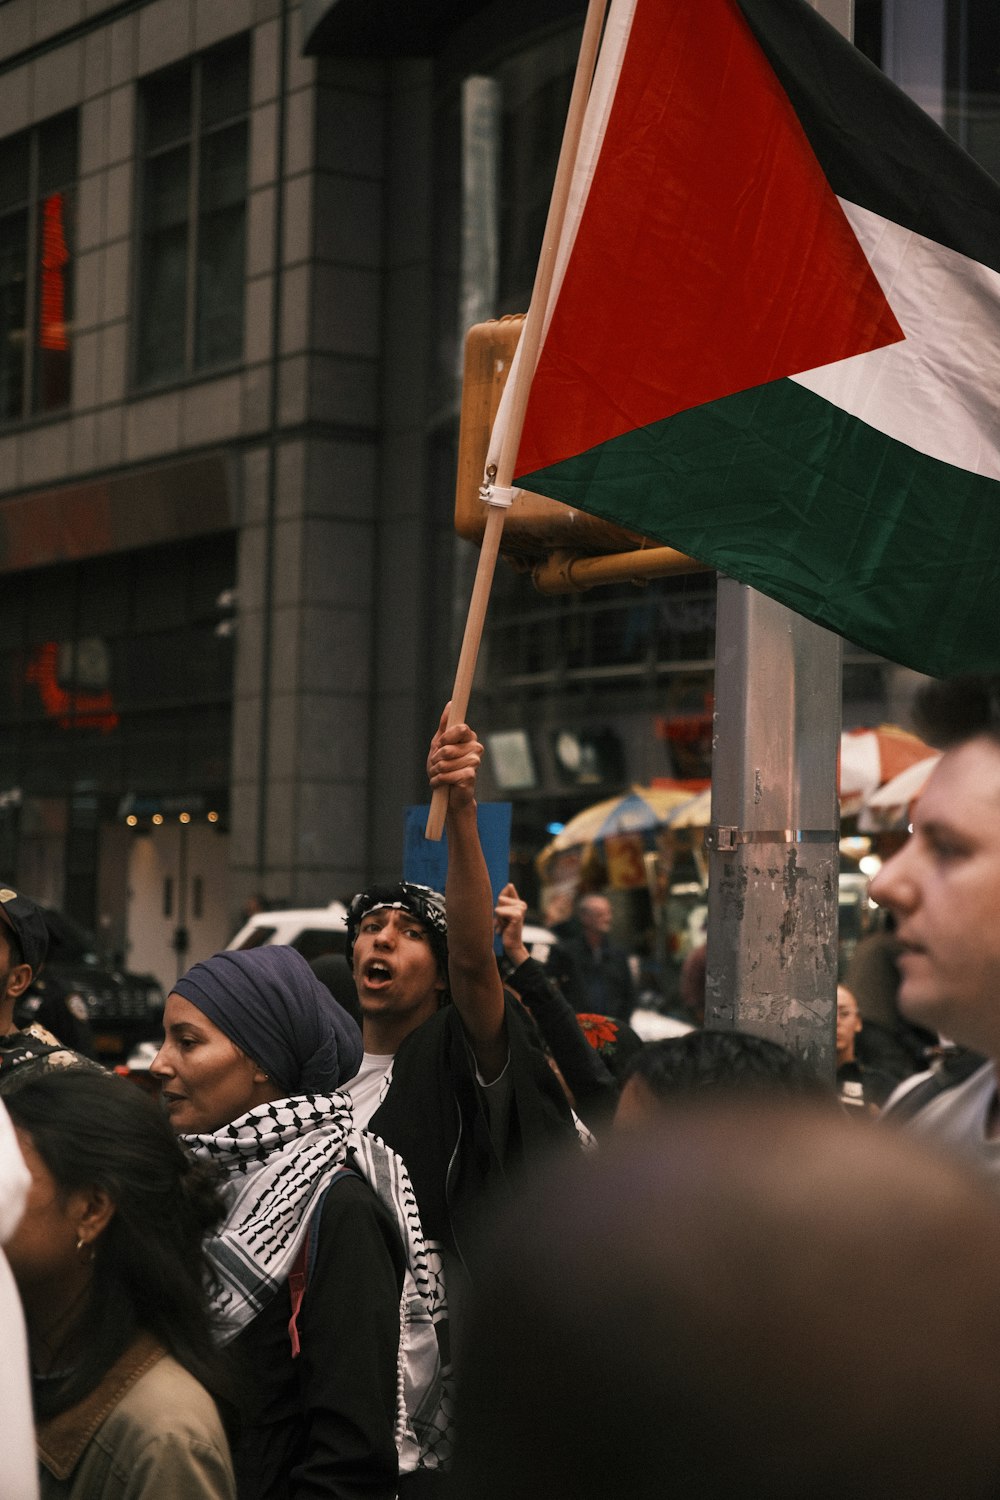 a man holding a flag in a crowd of people